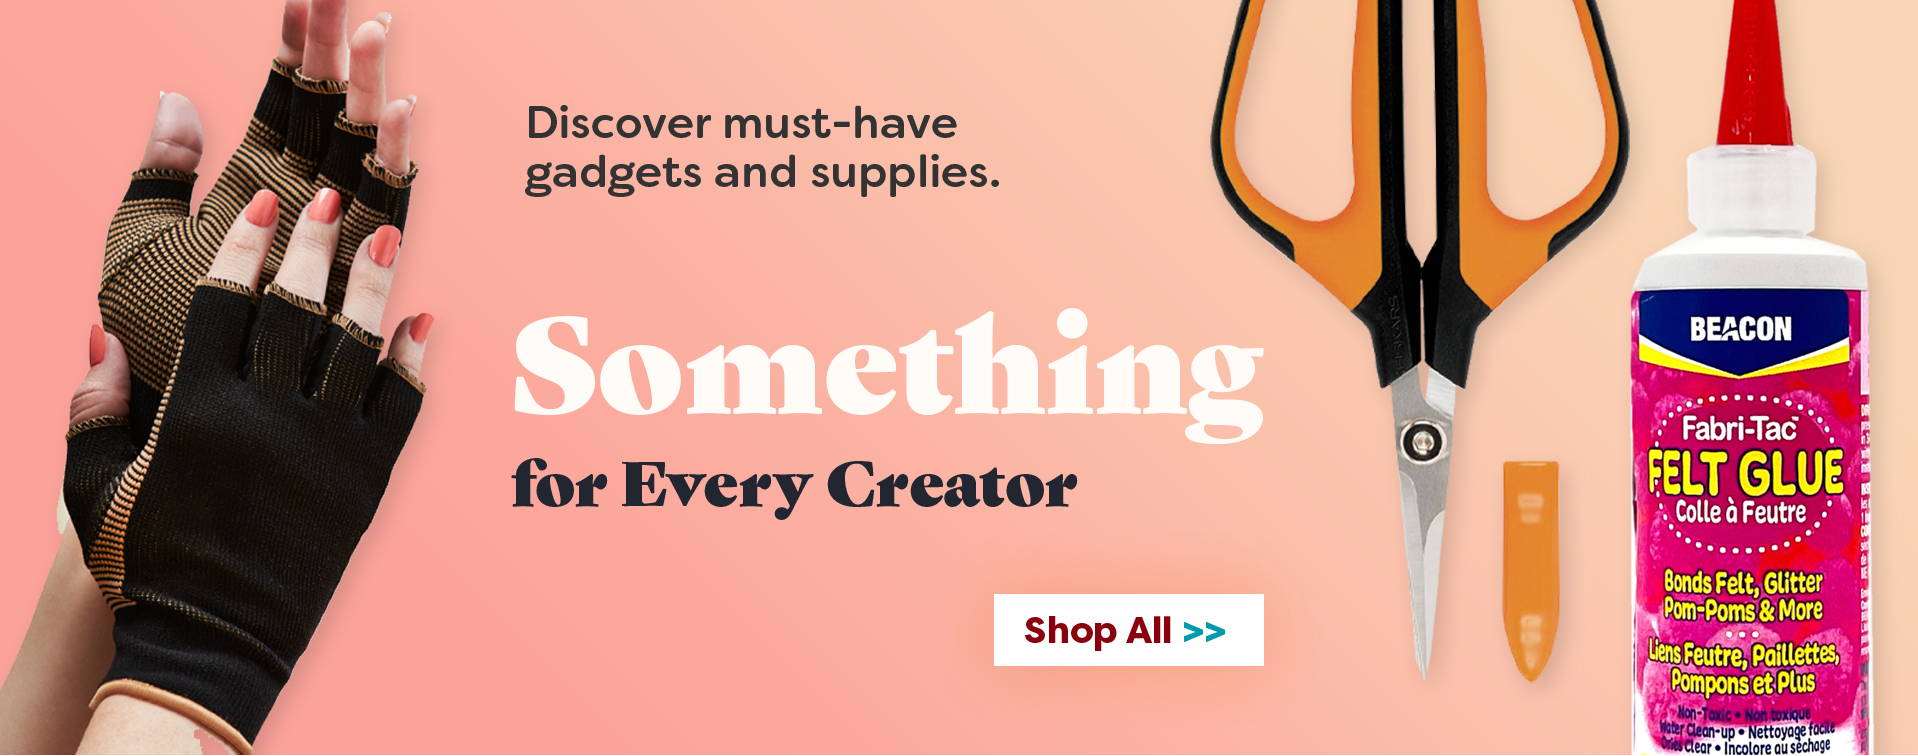 Disconver must-have gadgets and supplies. Something for every creator. Shop All.